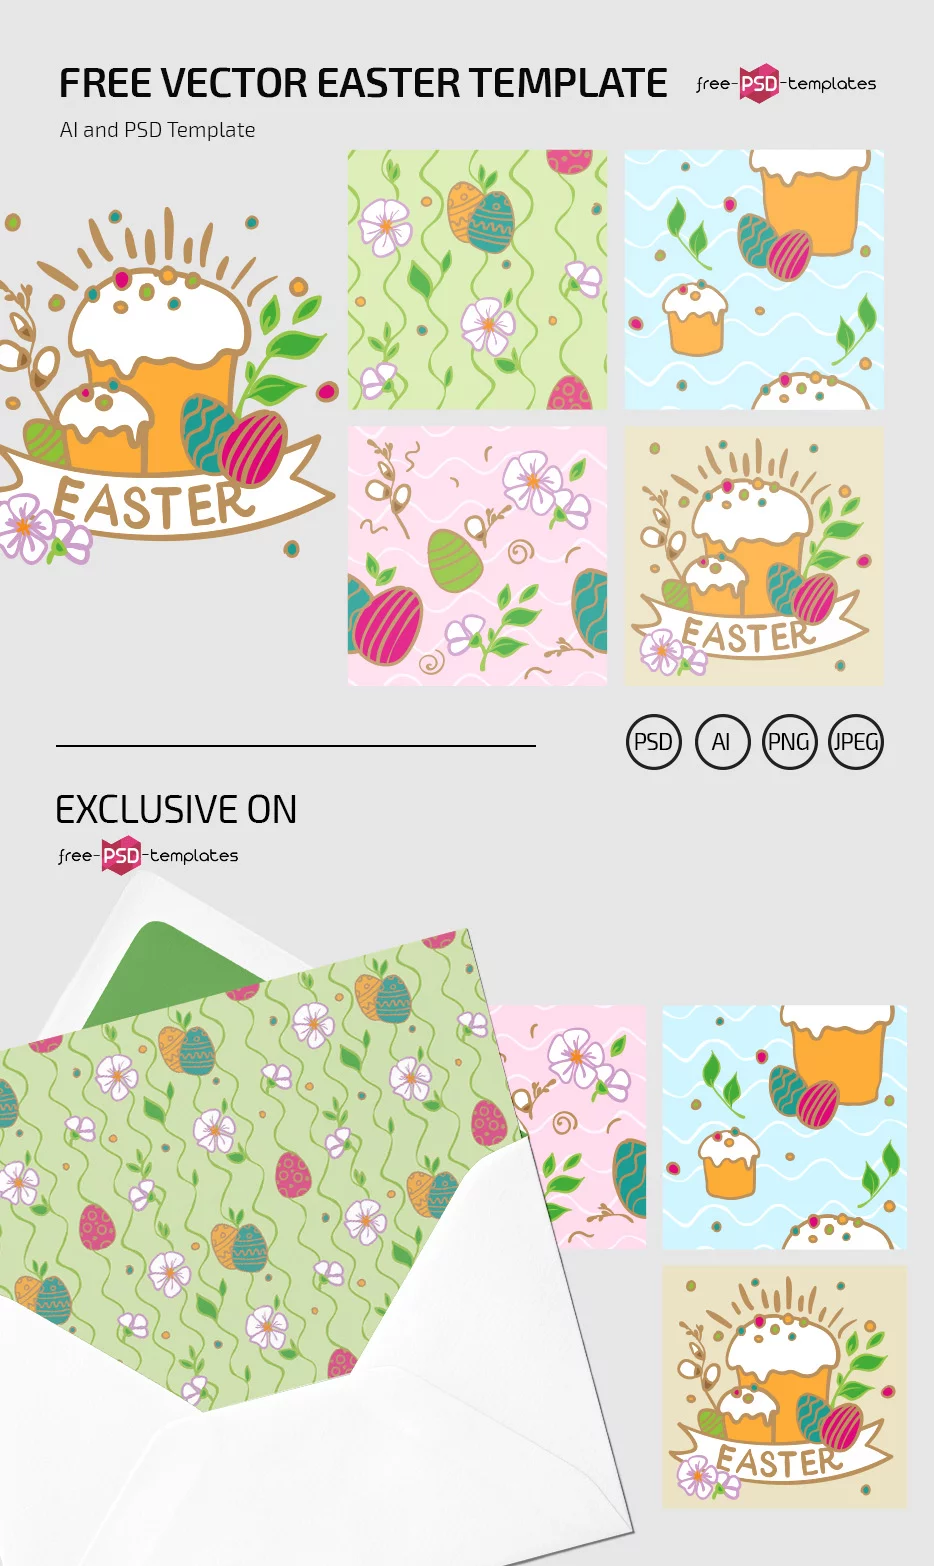 Free Vector Easter Template